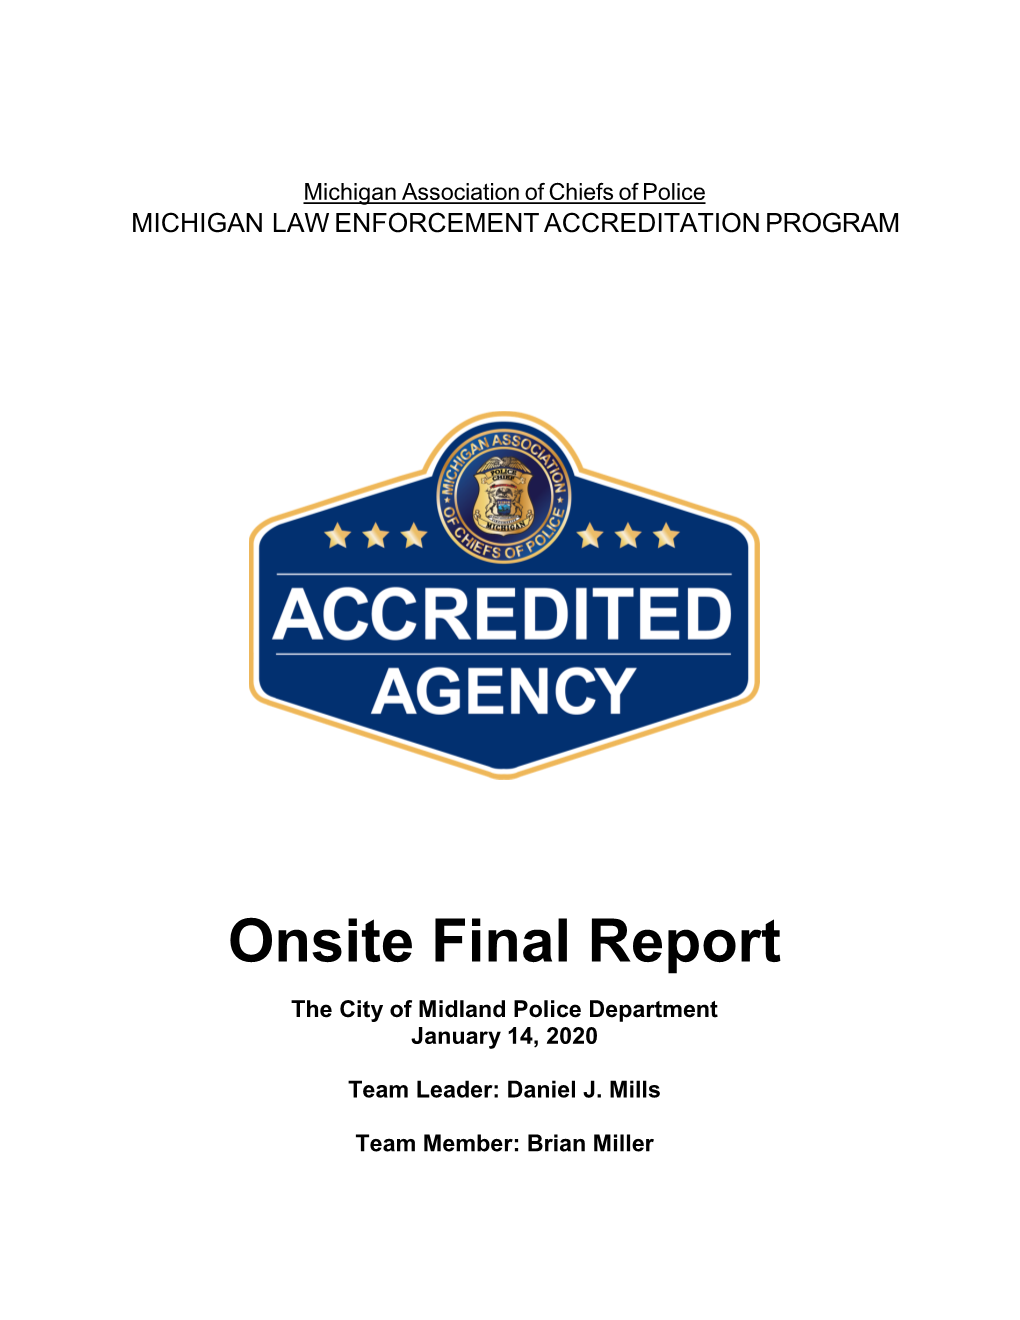 Revised Final Report Template